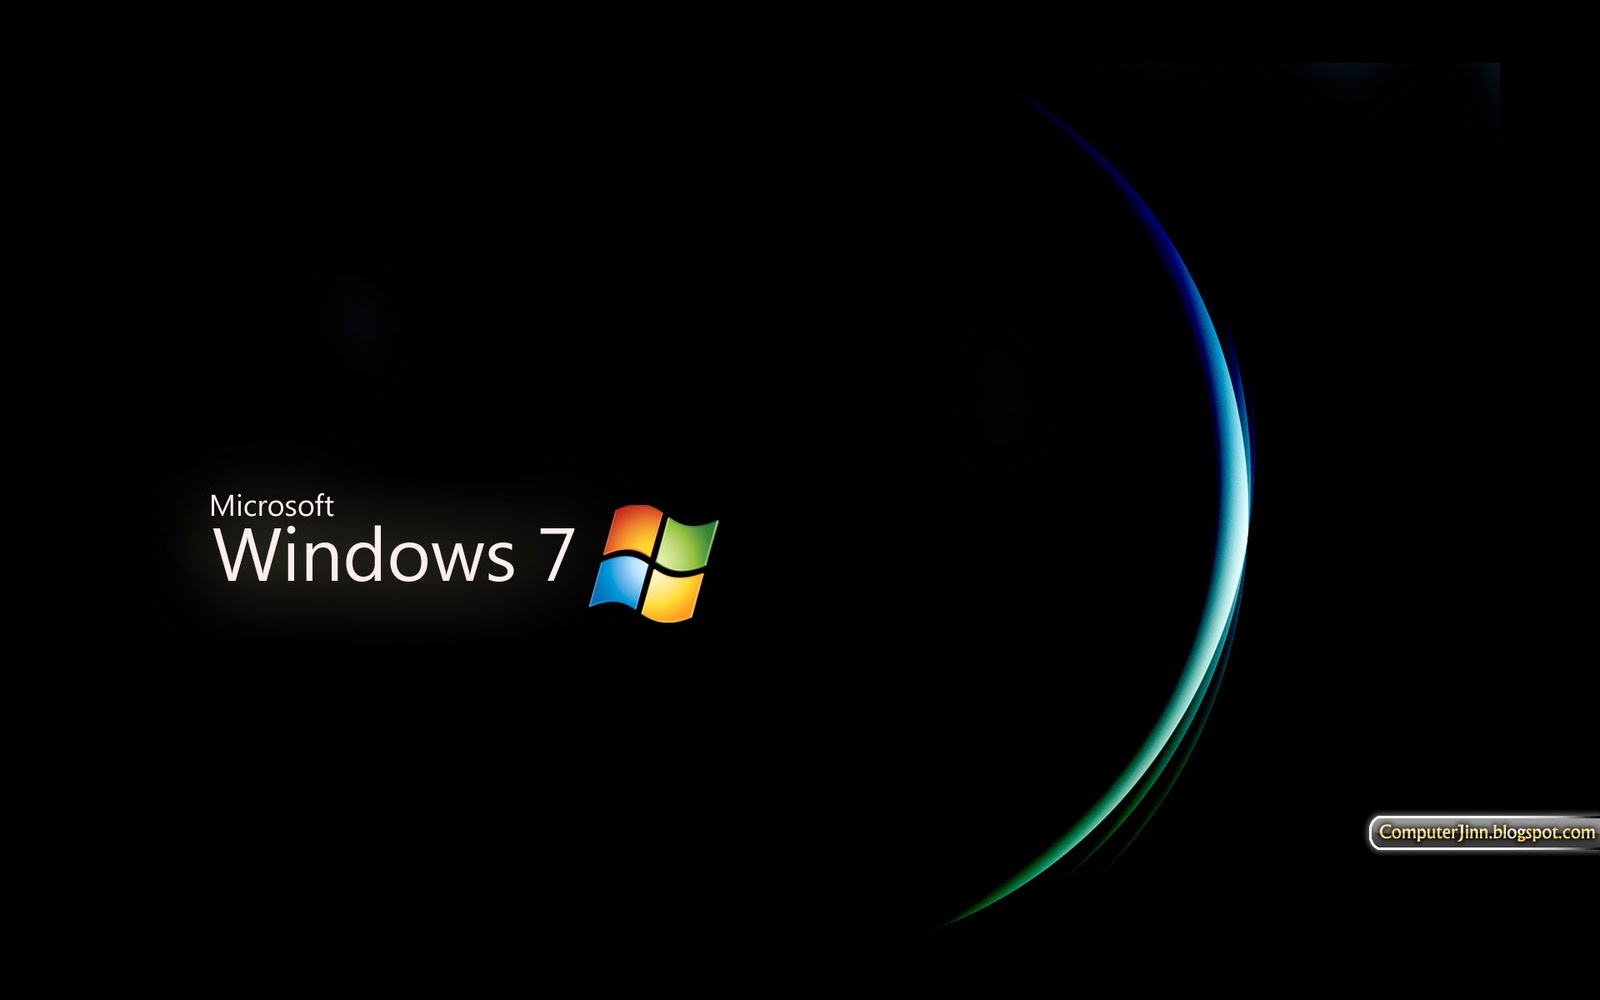 Windows 7 Black and Dark HD Wallpapers Wallpapers pictures images